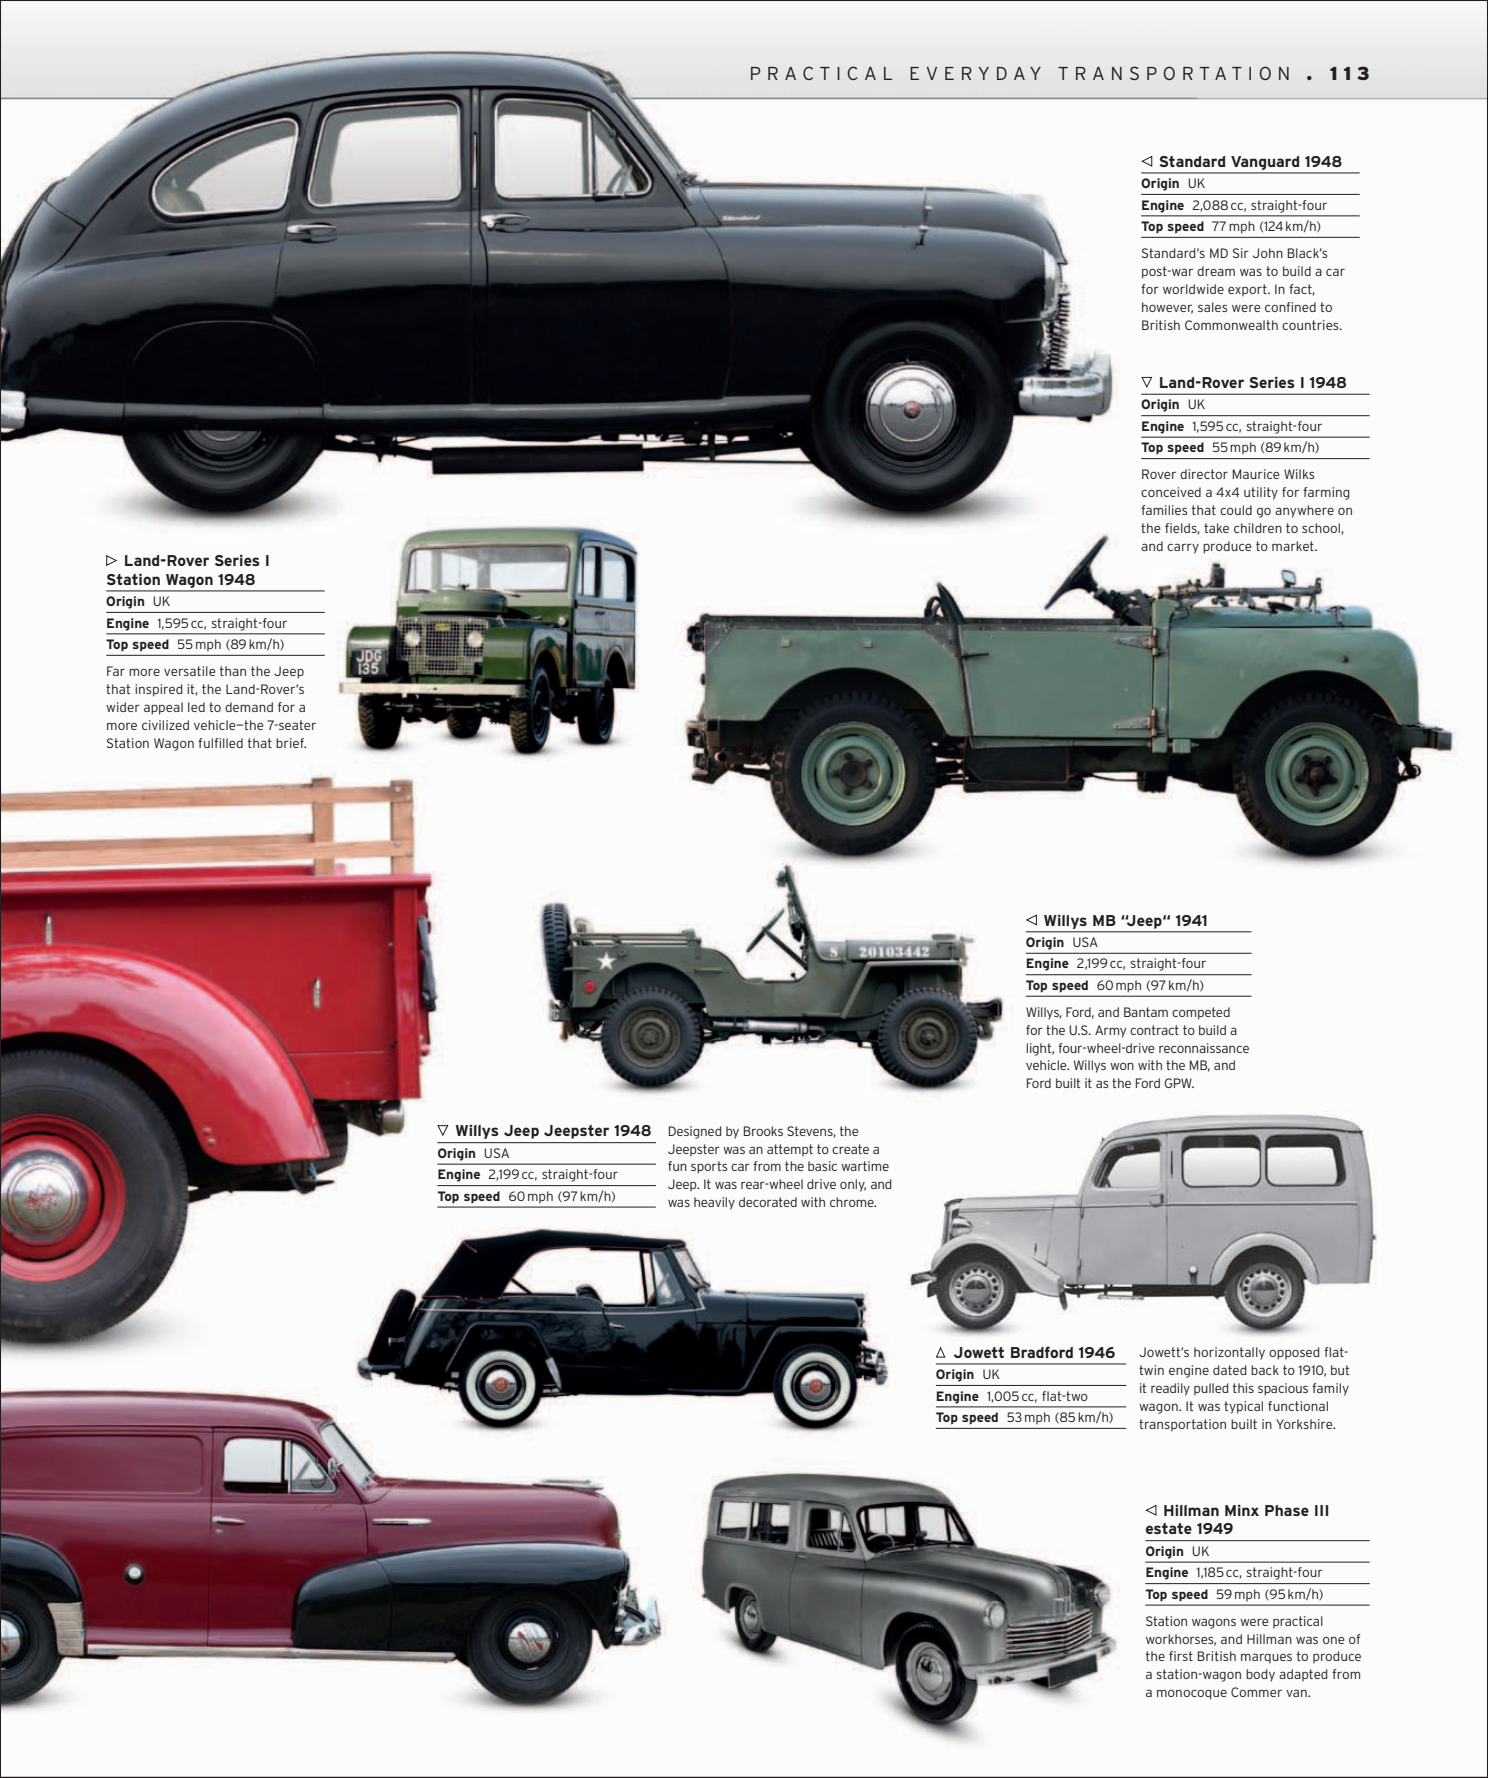 Car%20-%20The%20Definitive%20Visual%20History%20of%20the%20Automobile_115.png